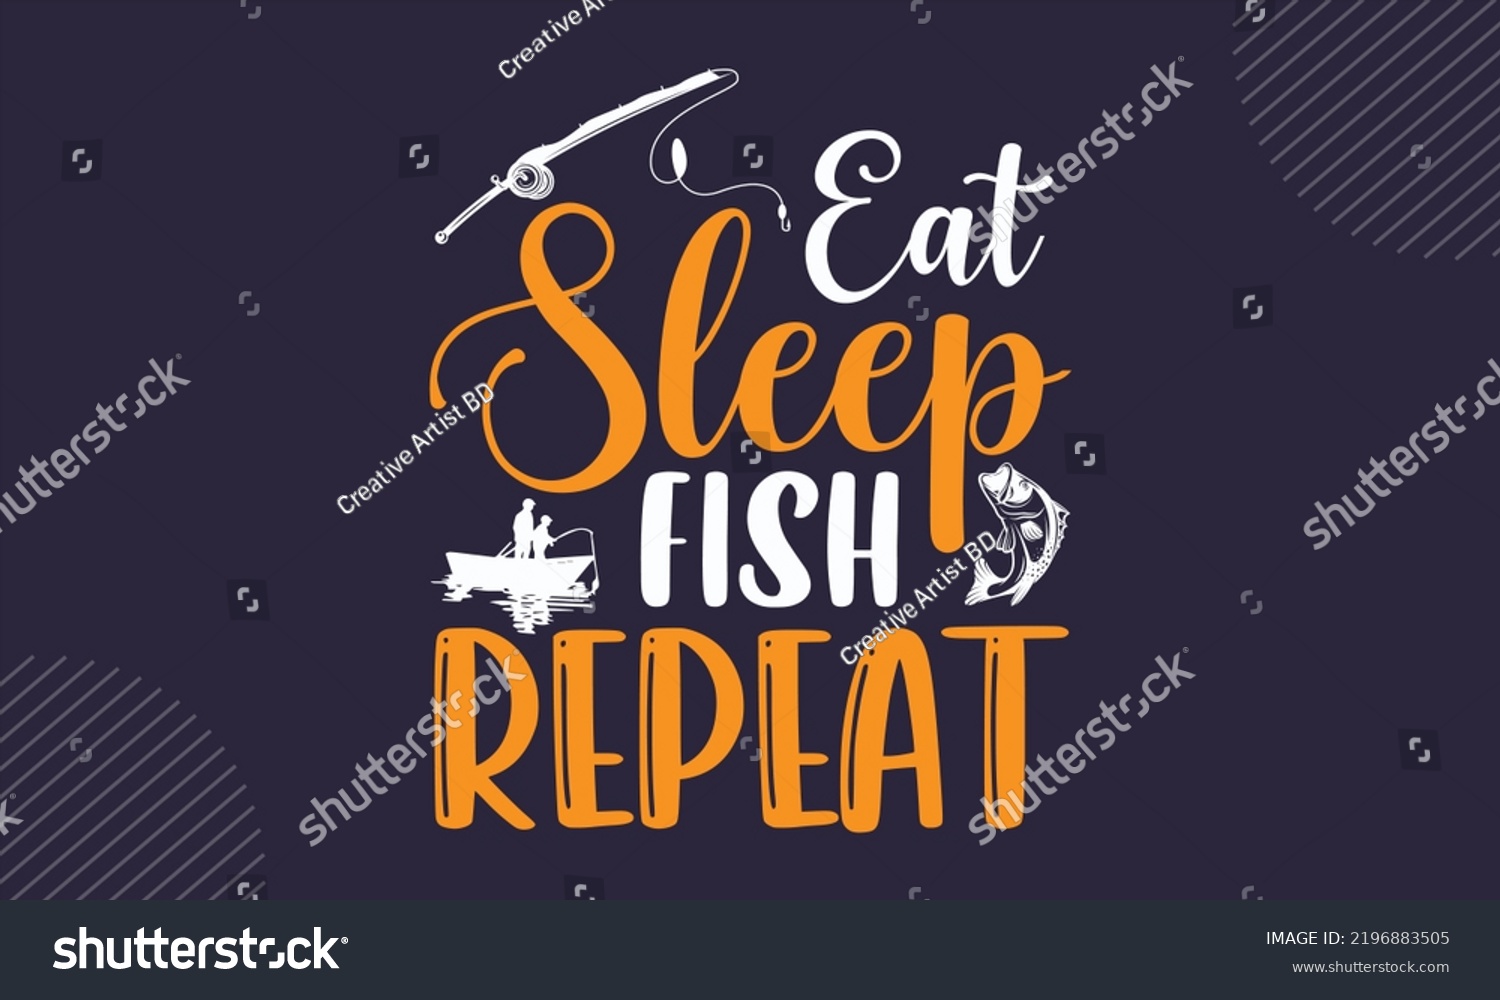 SVG of Eat Sleep Fish Repeat - Fishing T shirt Design, Hand drawn vintage illustration with hand-lettering and decoration elements, Cut Files for Cricut Svg, Digital Download svg